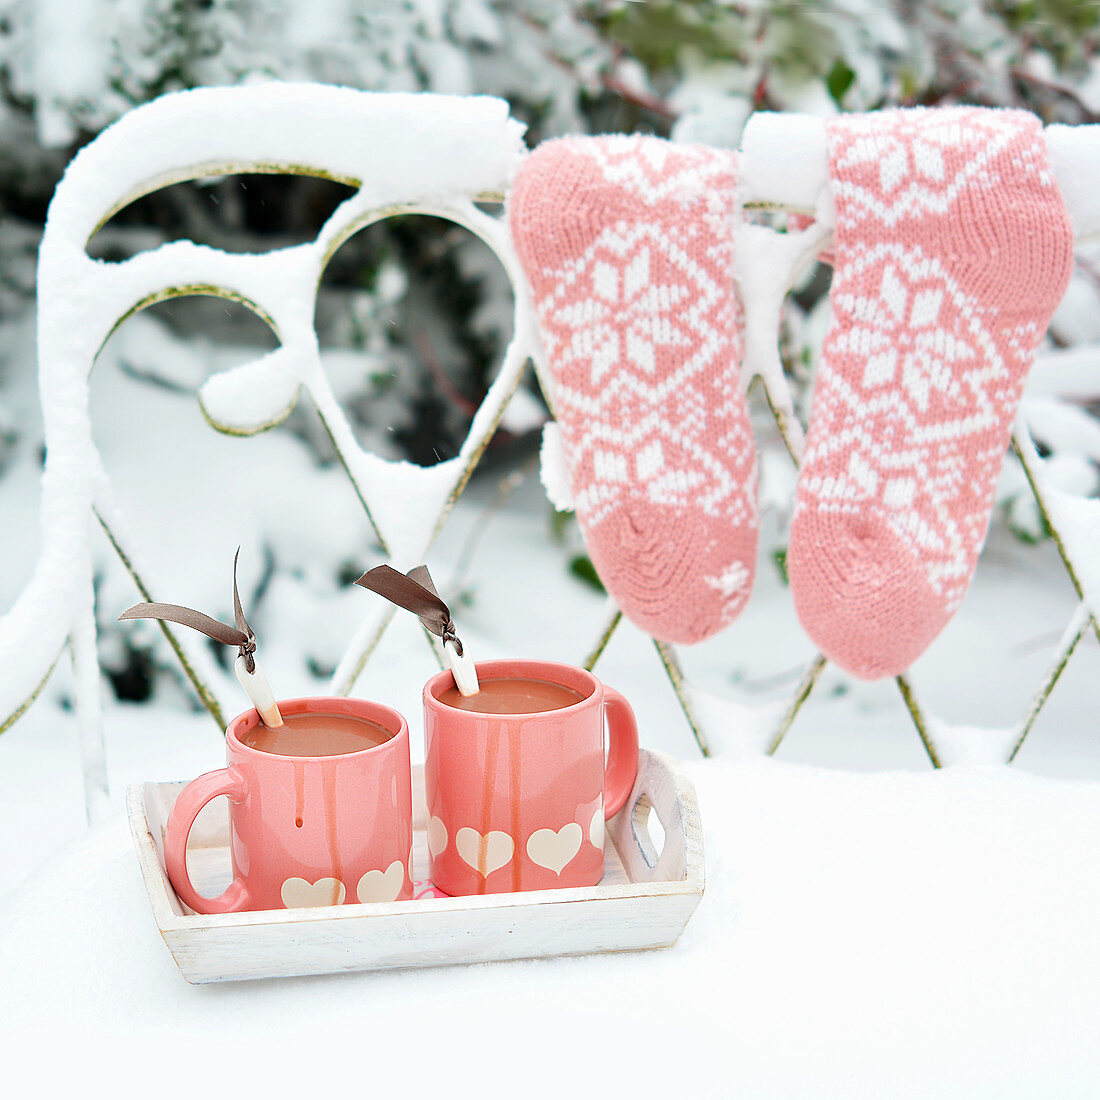 Two cups of hot chocolate on a snow-covered garden bench